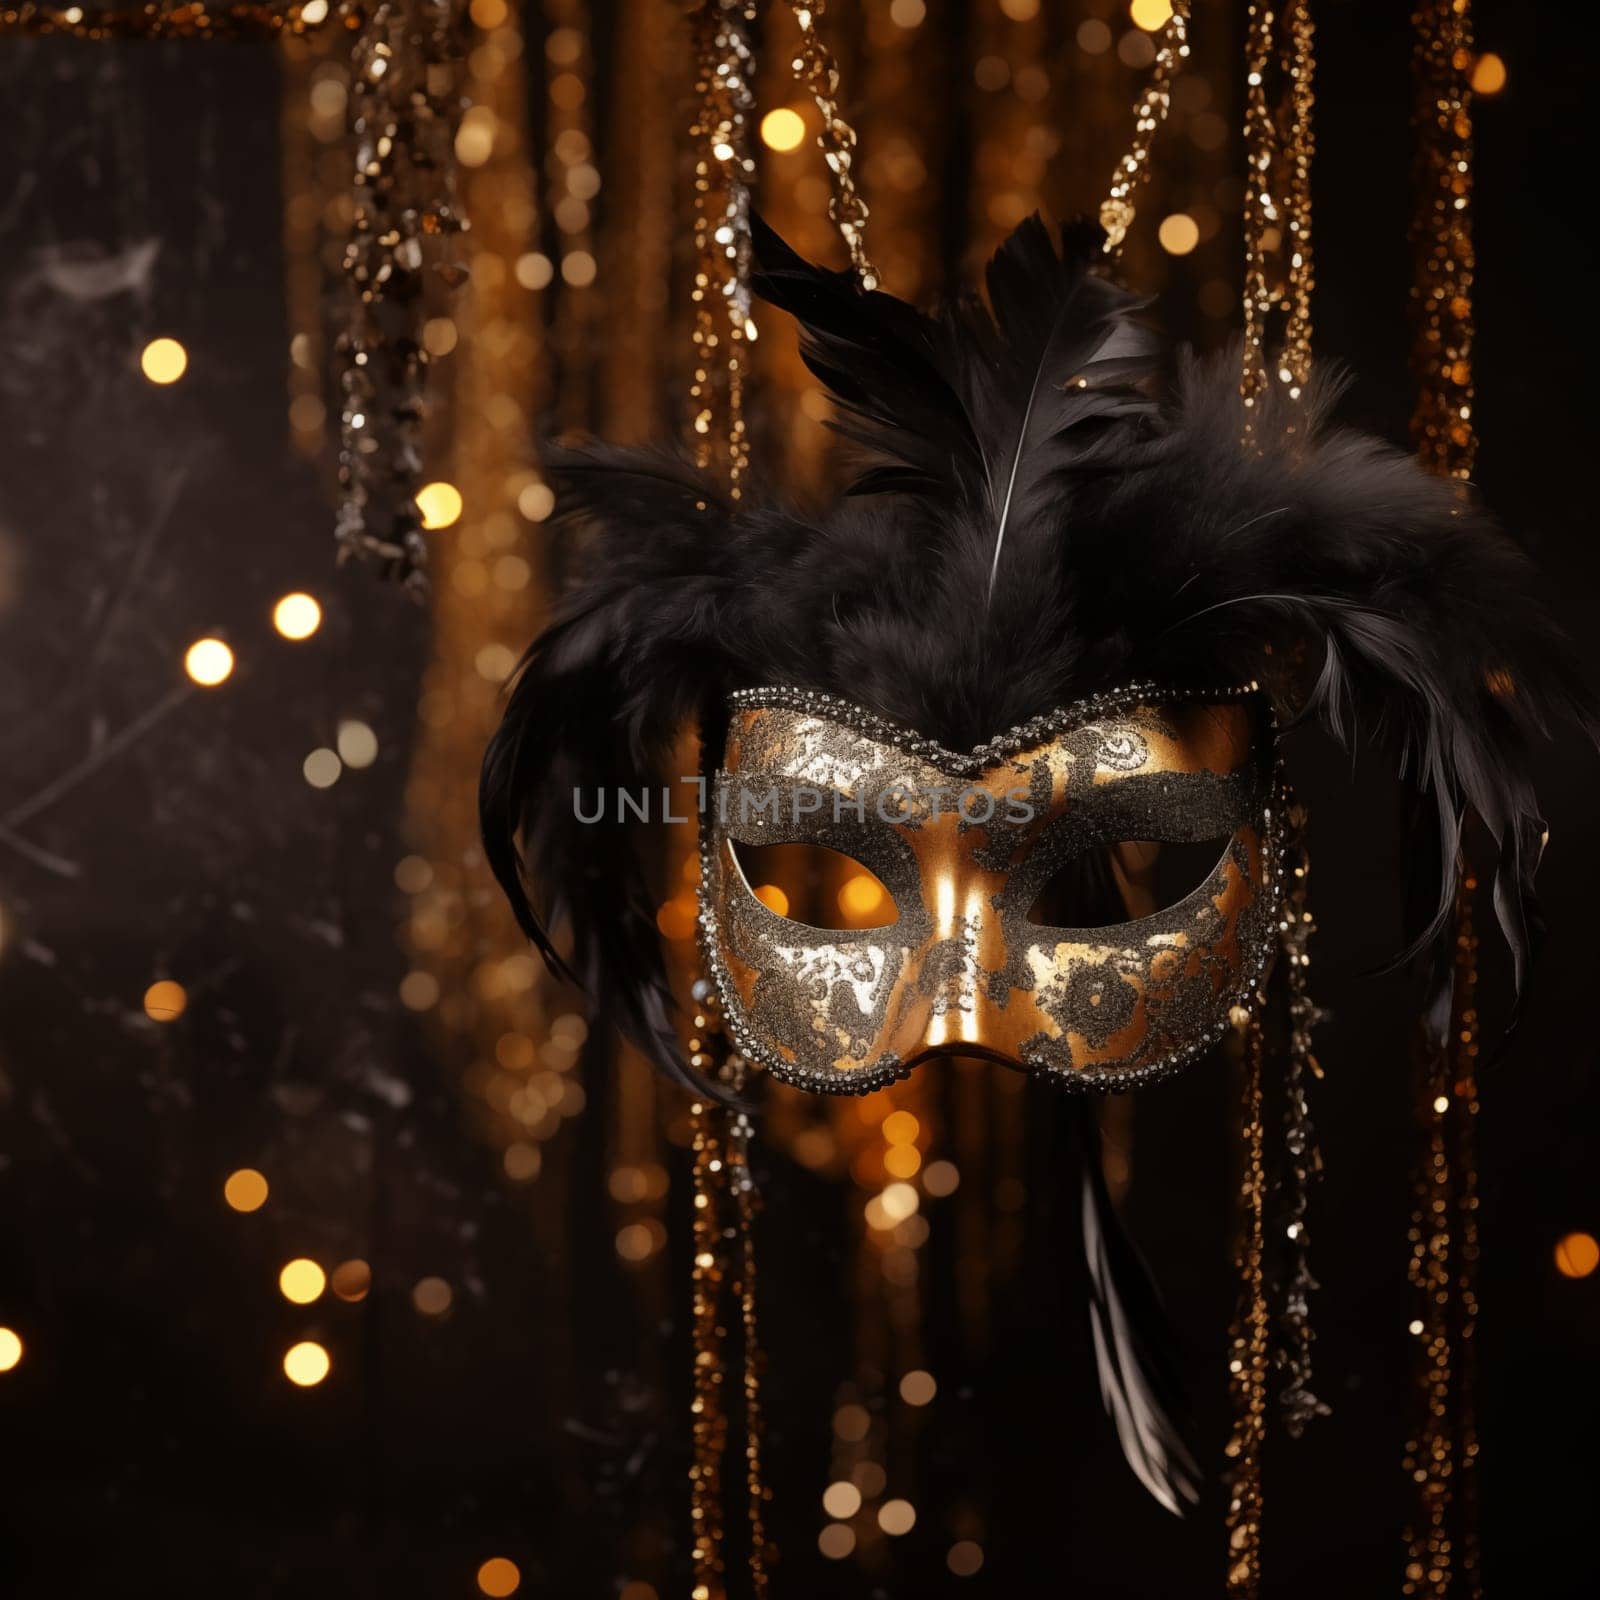 This captivating photo captures the essence of a masquerade party with a striking mask adorned with delicate feathers. The feathers hang gracefully, adding an air of mystery and allure to the masks design.